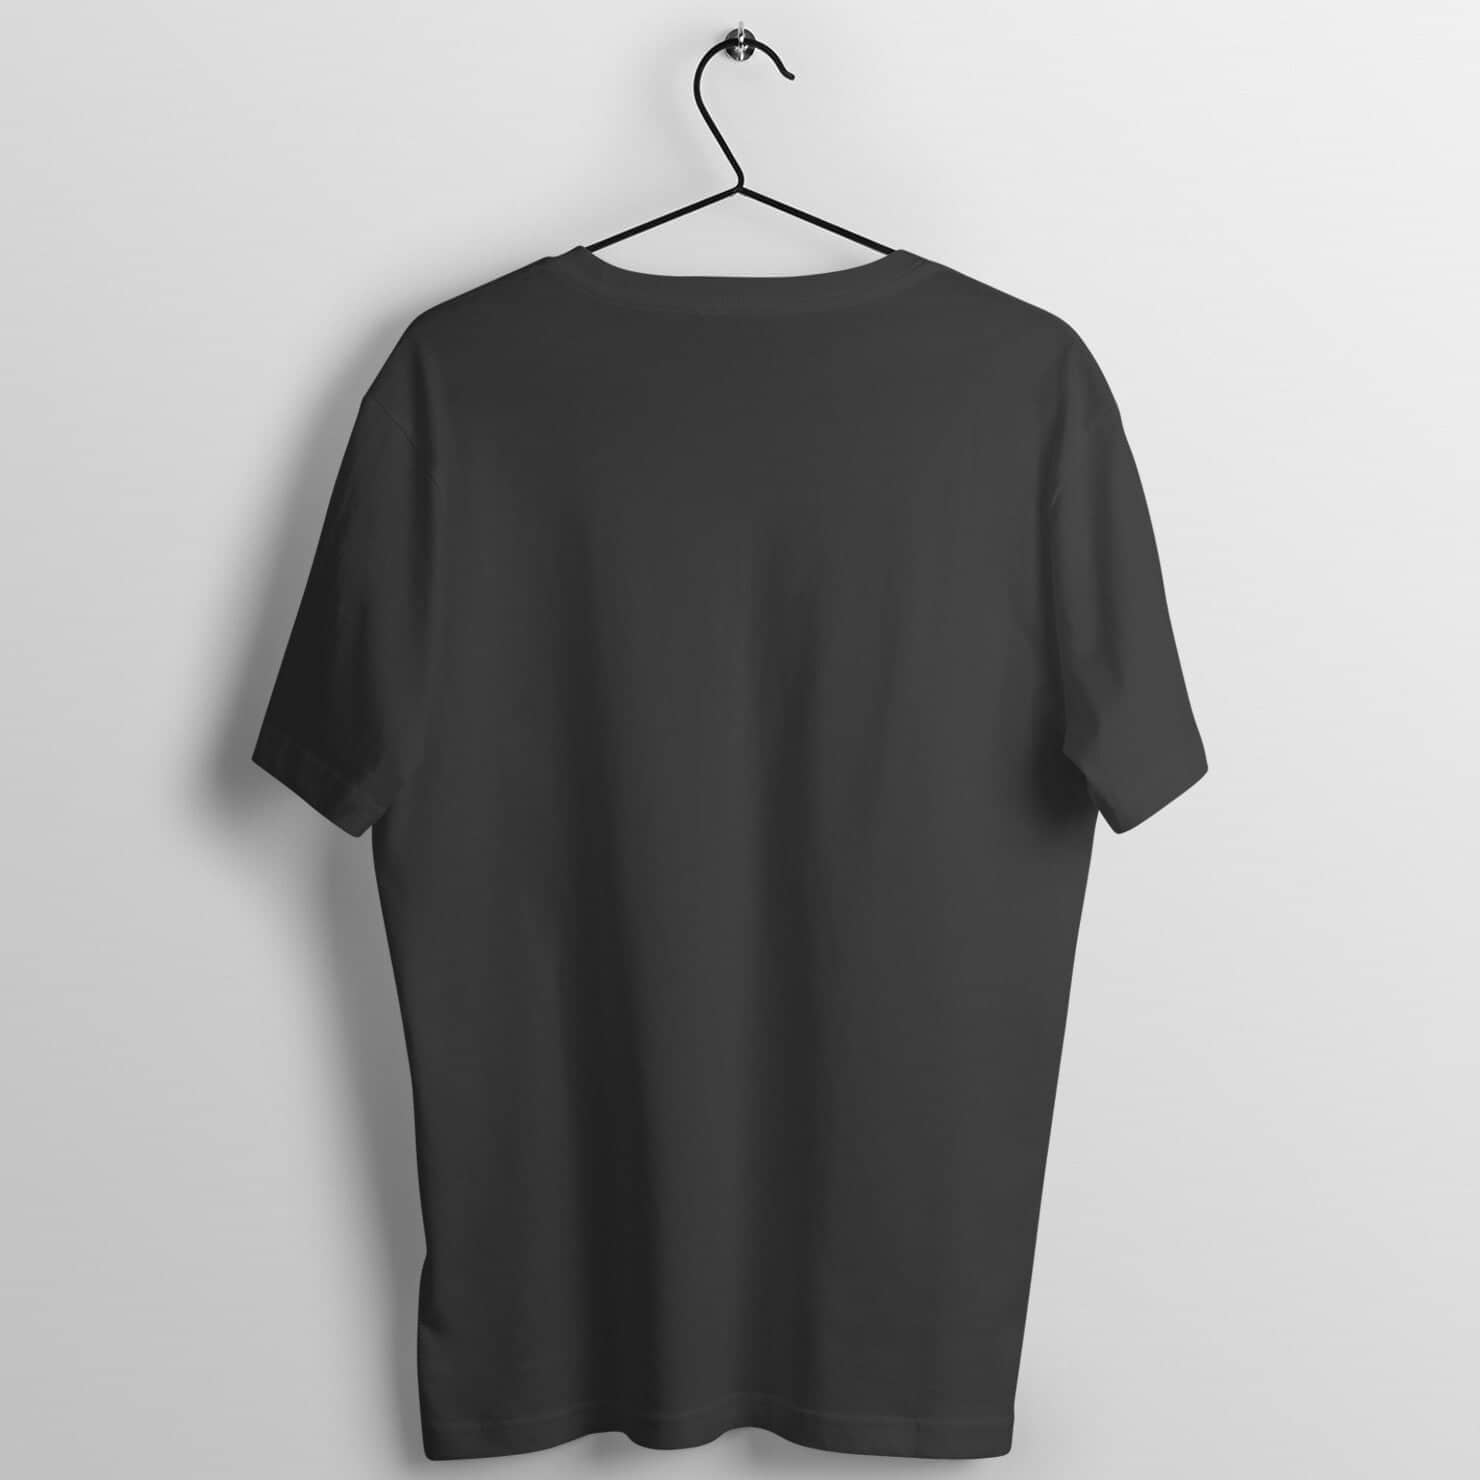 The Original Exclusive Black T Shirt for Men and Women Printrove 